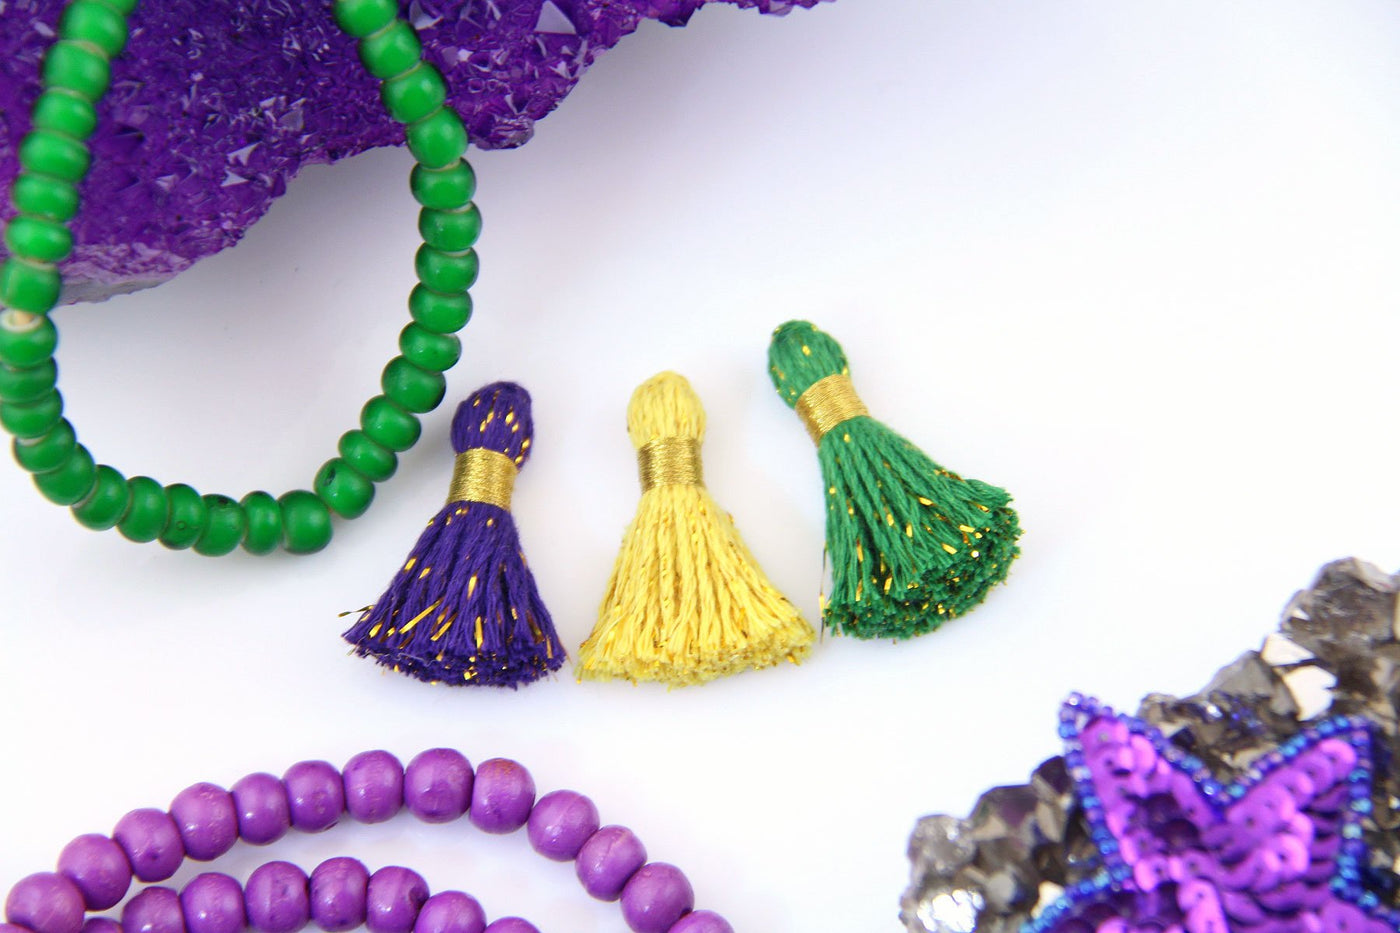 Mardi Gras: Cotton & Sparkly Tinsel Tassels, 1.25" Fringe Pendant Charms, Jewelry Making Supplies